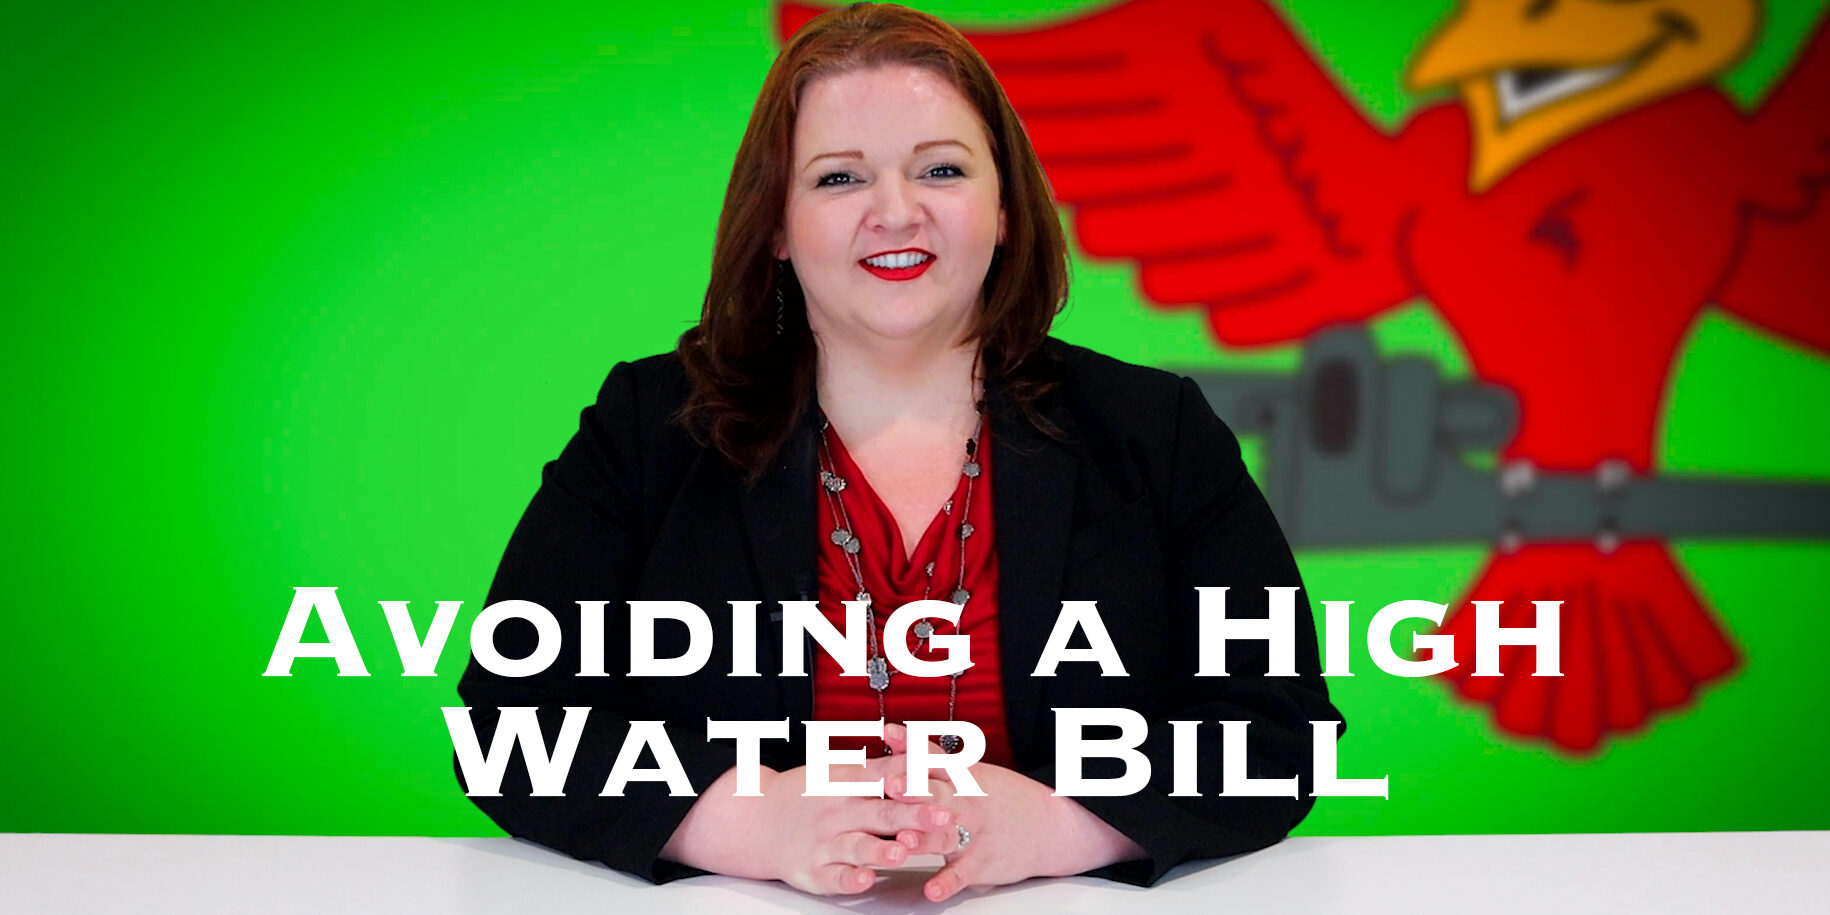 Cover photo for blog and video "Avoiding a High Water Bill"